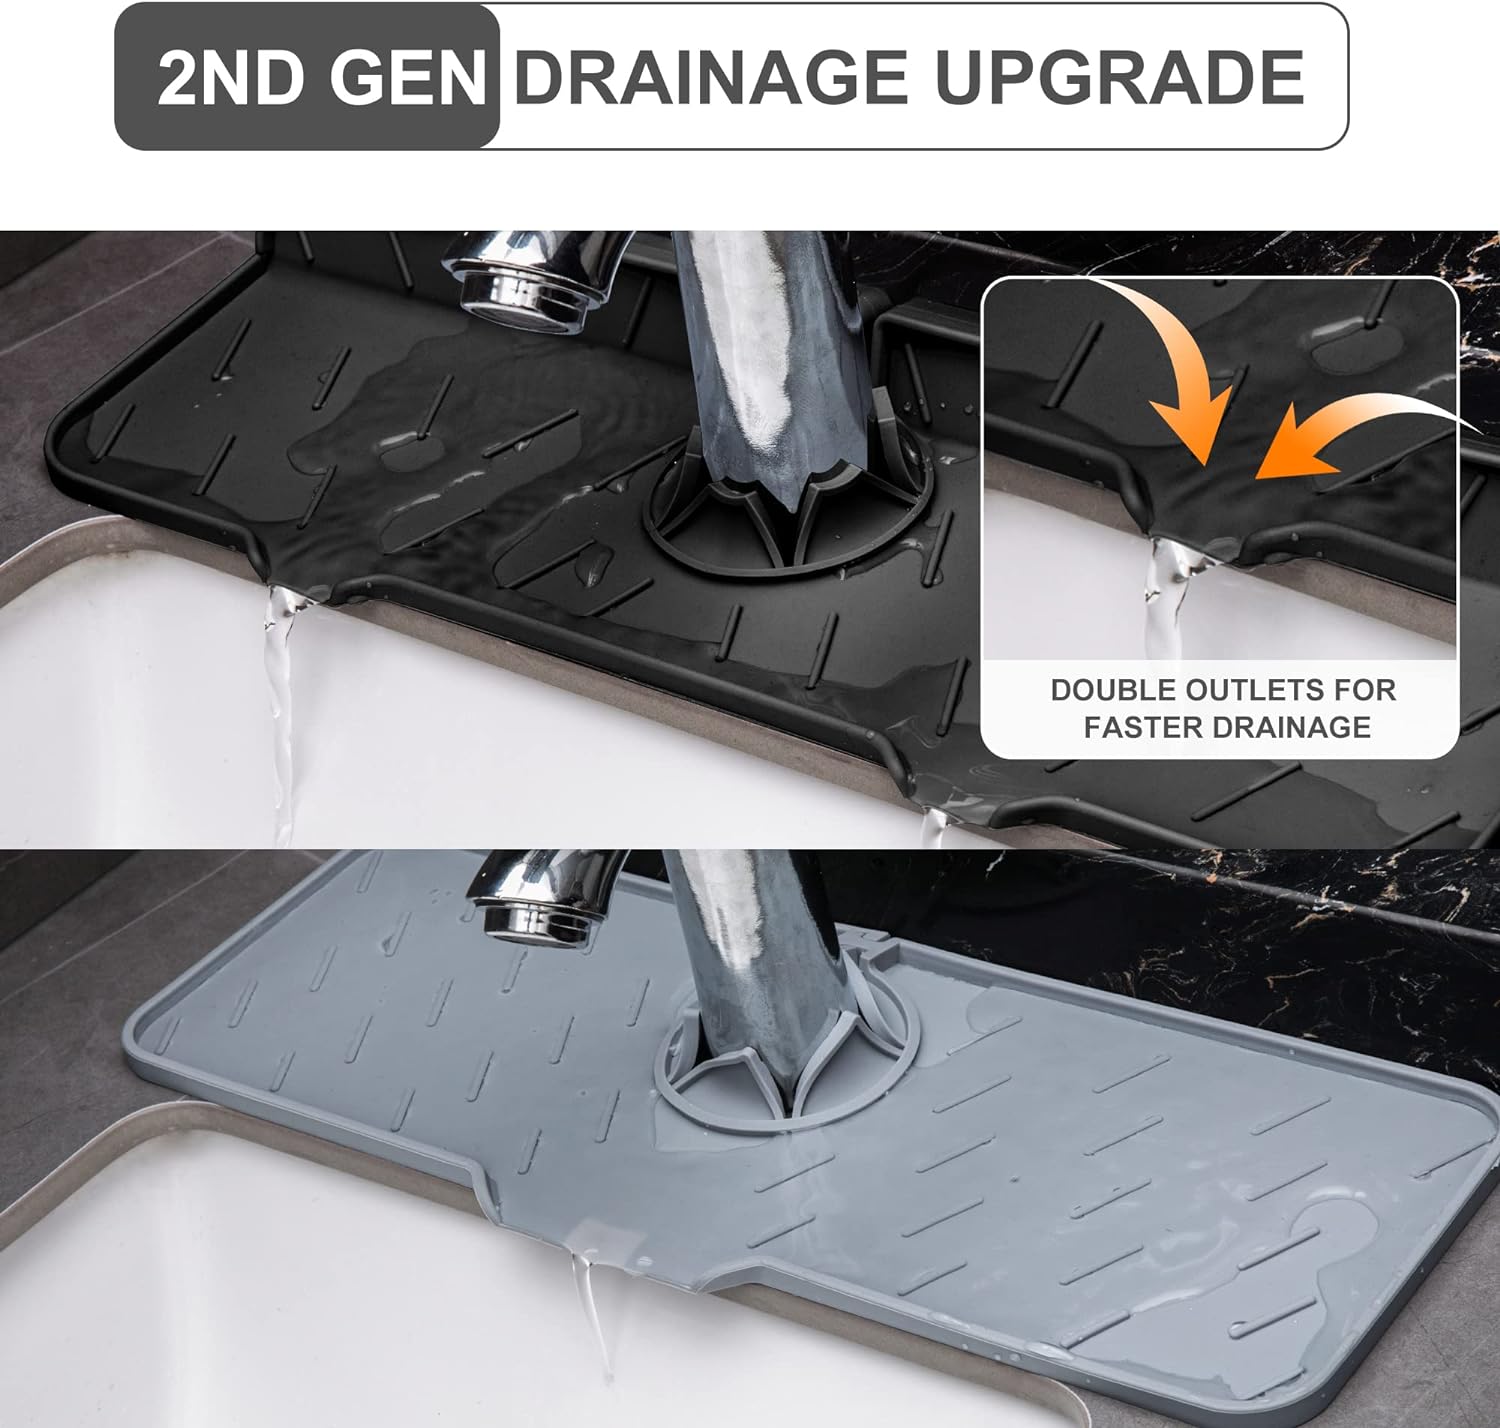 Wholesale prices with free shipping all over United States Meiliweser Silicone Faucet Splash Guard Gen 2 - Outlet & Slope Upgraded Faucet Water Catcher Mat - 18” x 5.1” - Sink Sponge Holder for Kitchen, Bathroom(Black) - Steven Deals